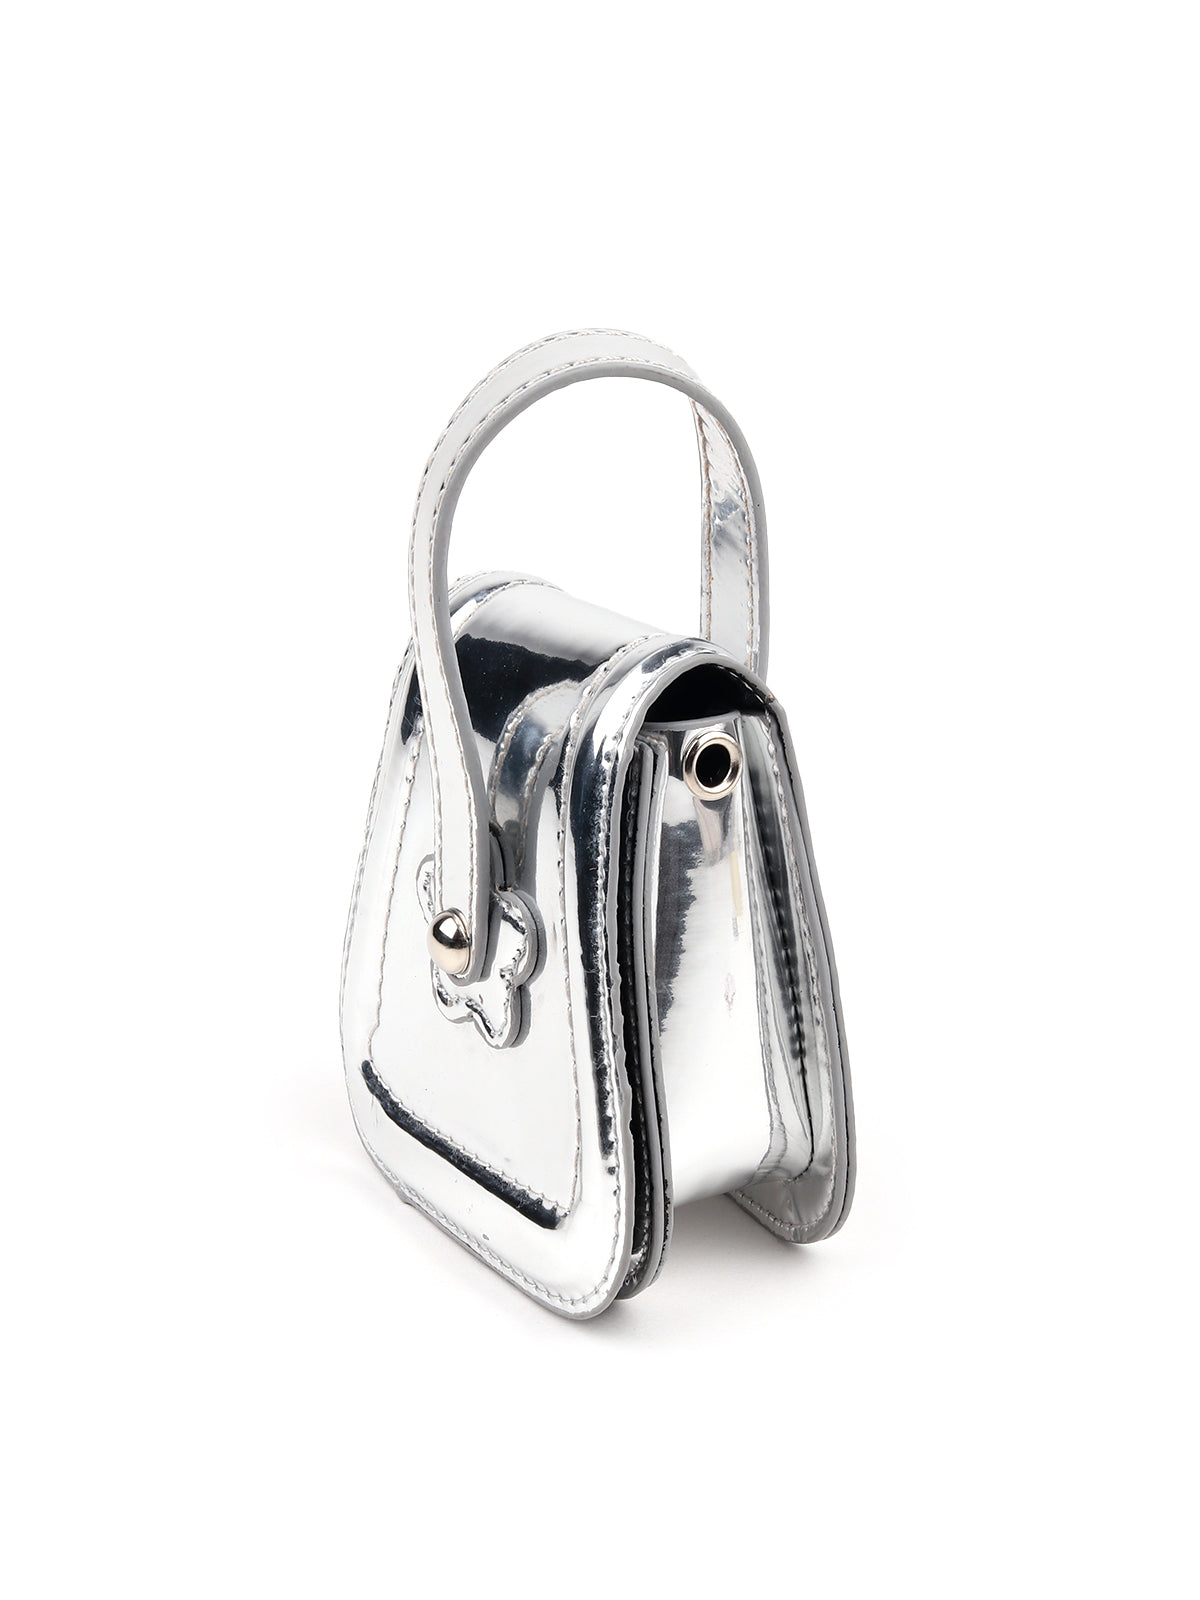 Stylish Silver Pouch With Belt